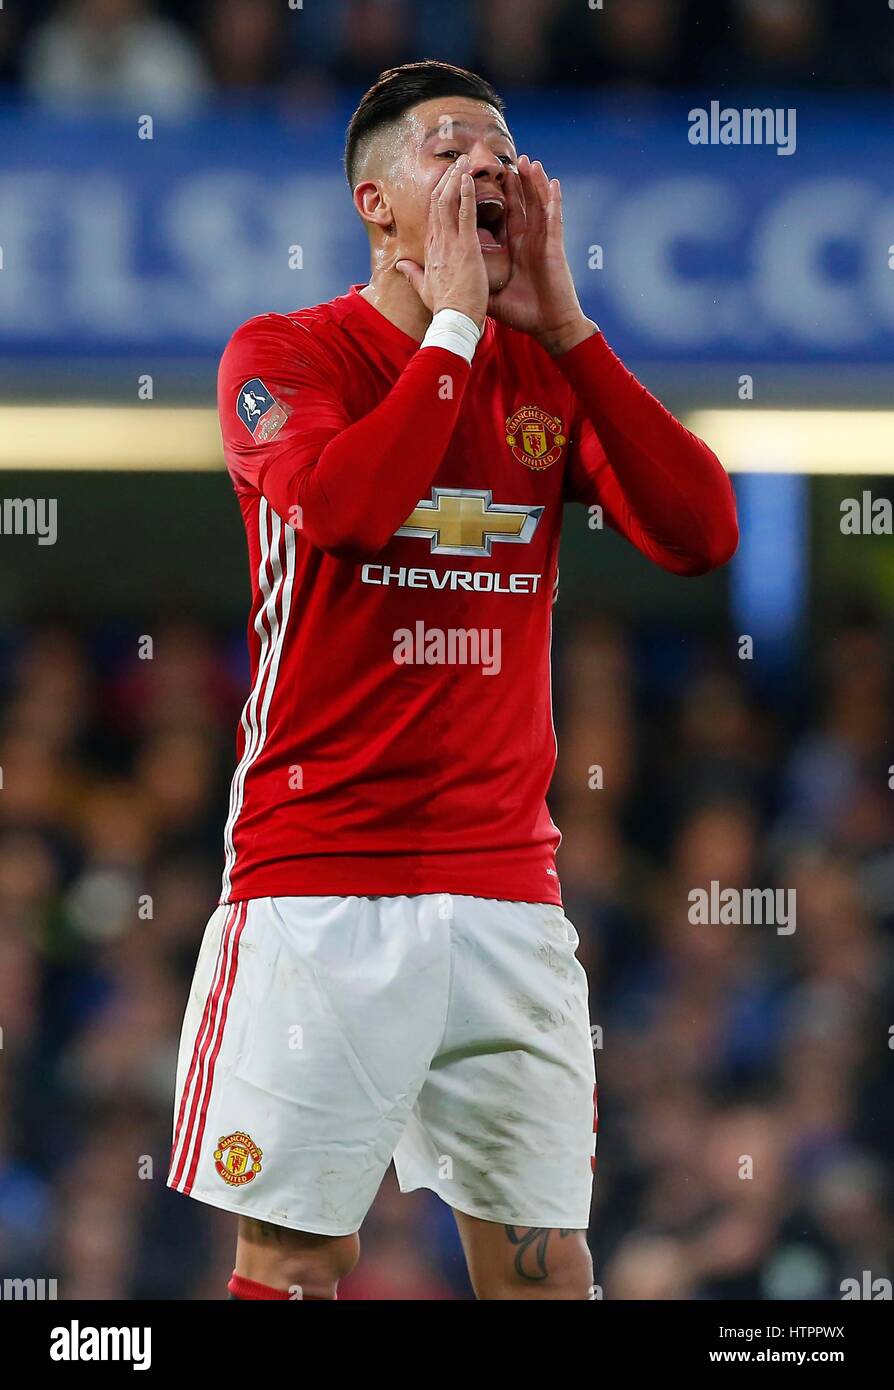 Marcos Rojo of Manchester United during the FA Cup match between Chelsea and Manchester United at Stamford Bridge in London. March 13, 2017. *** EDITORIAL USE ONLY *** FA Premier League and Football League images are subject to DataCo Licence see www.football-dataco.com James Boardman / Telephoto Images +44 7967 642437 Stock Photo